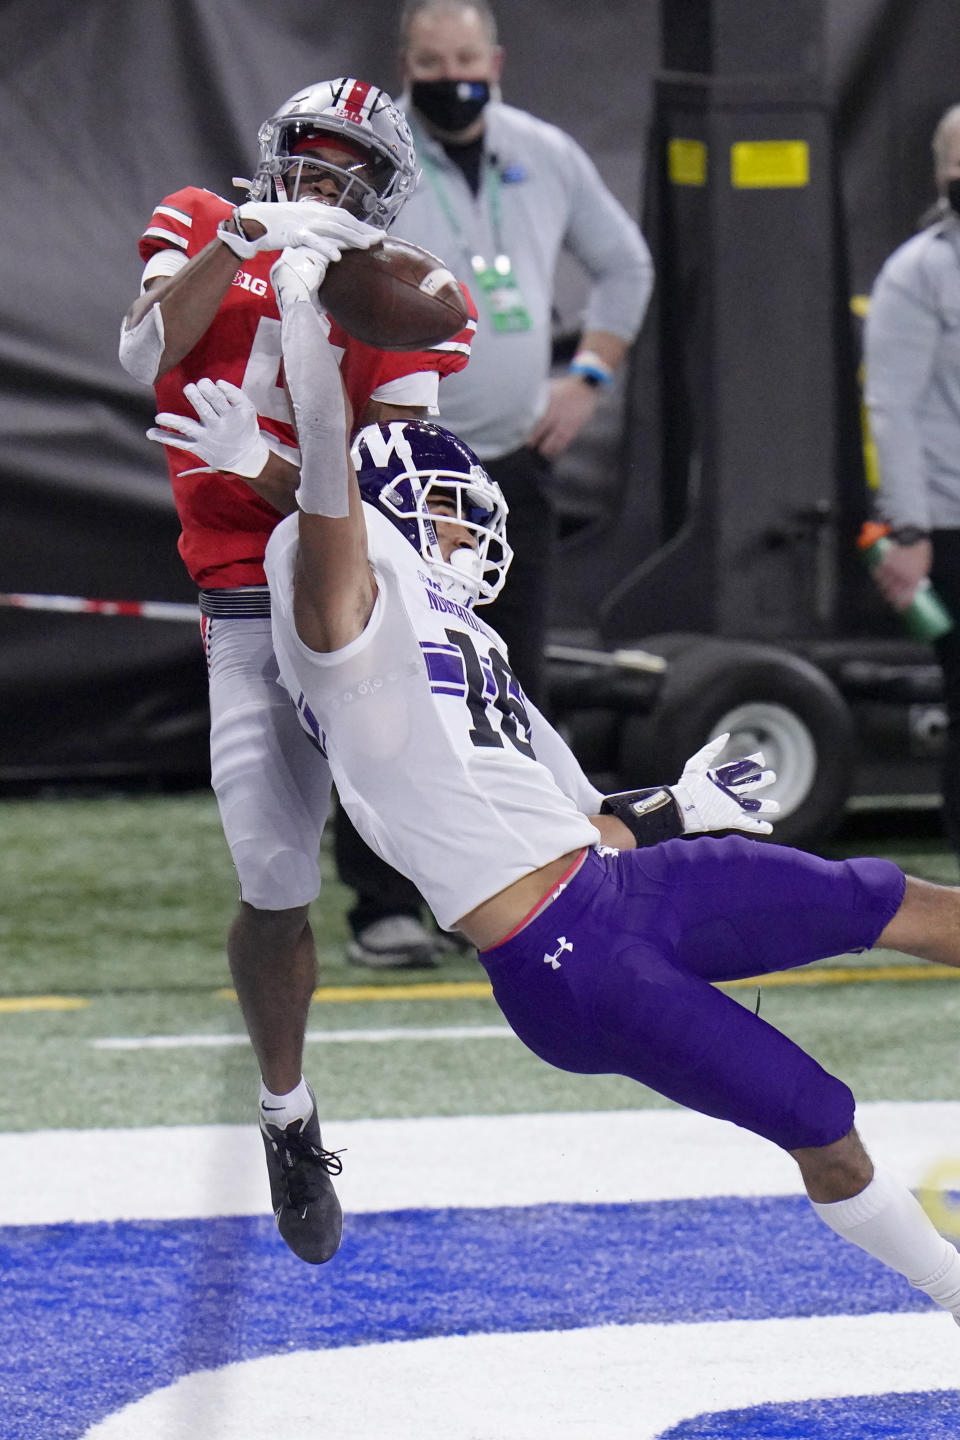 Northwestern defensive back Brandon Joseph (16) intercepts a pass intended for Ohio State wide receiver Garrett Wilson in the end zone during the first half of the Big Ten championship NCAA college football game, Saturday, Dec. 19, 2020, in Indianapolis. (AP Photo/AJ Mast)